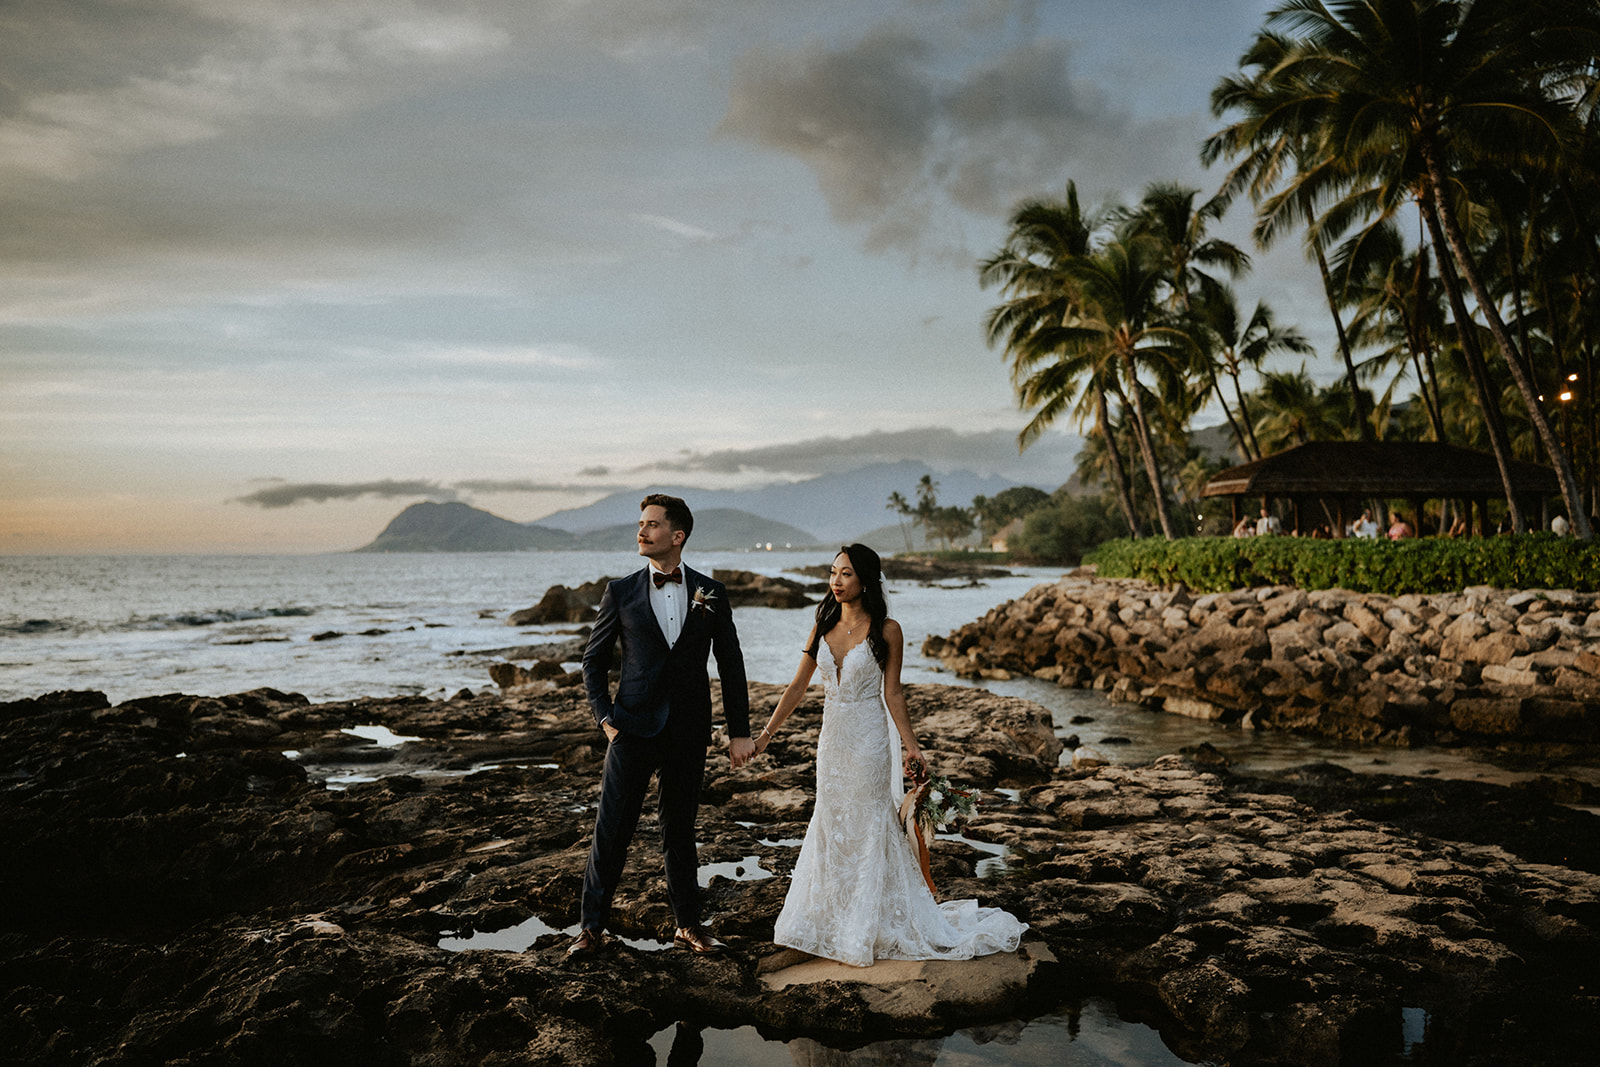 Bride and groom on the rocky shore of the beach fronting Lanikuhonua during sunset